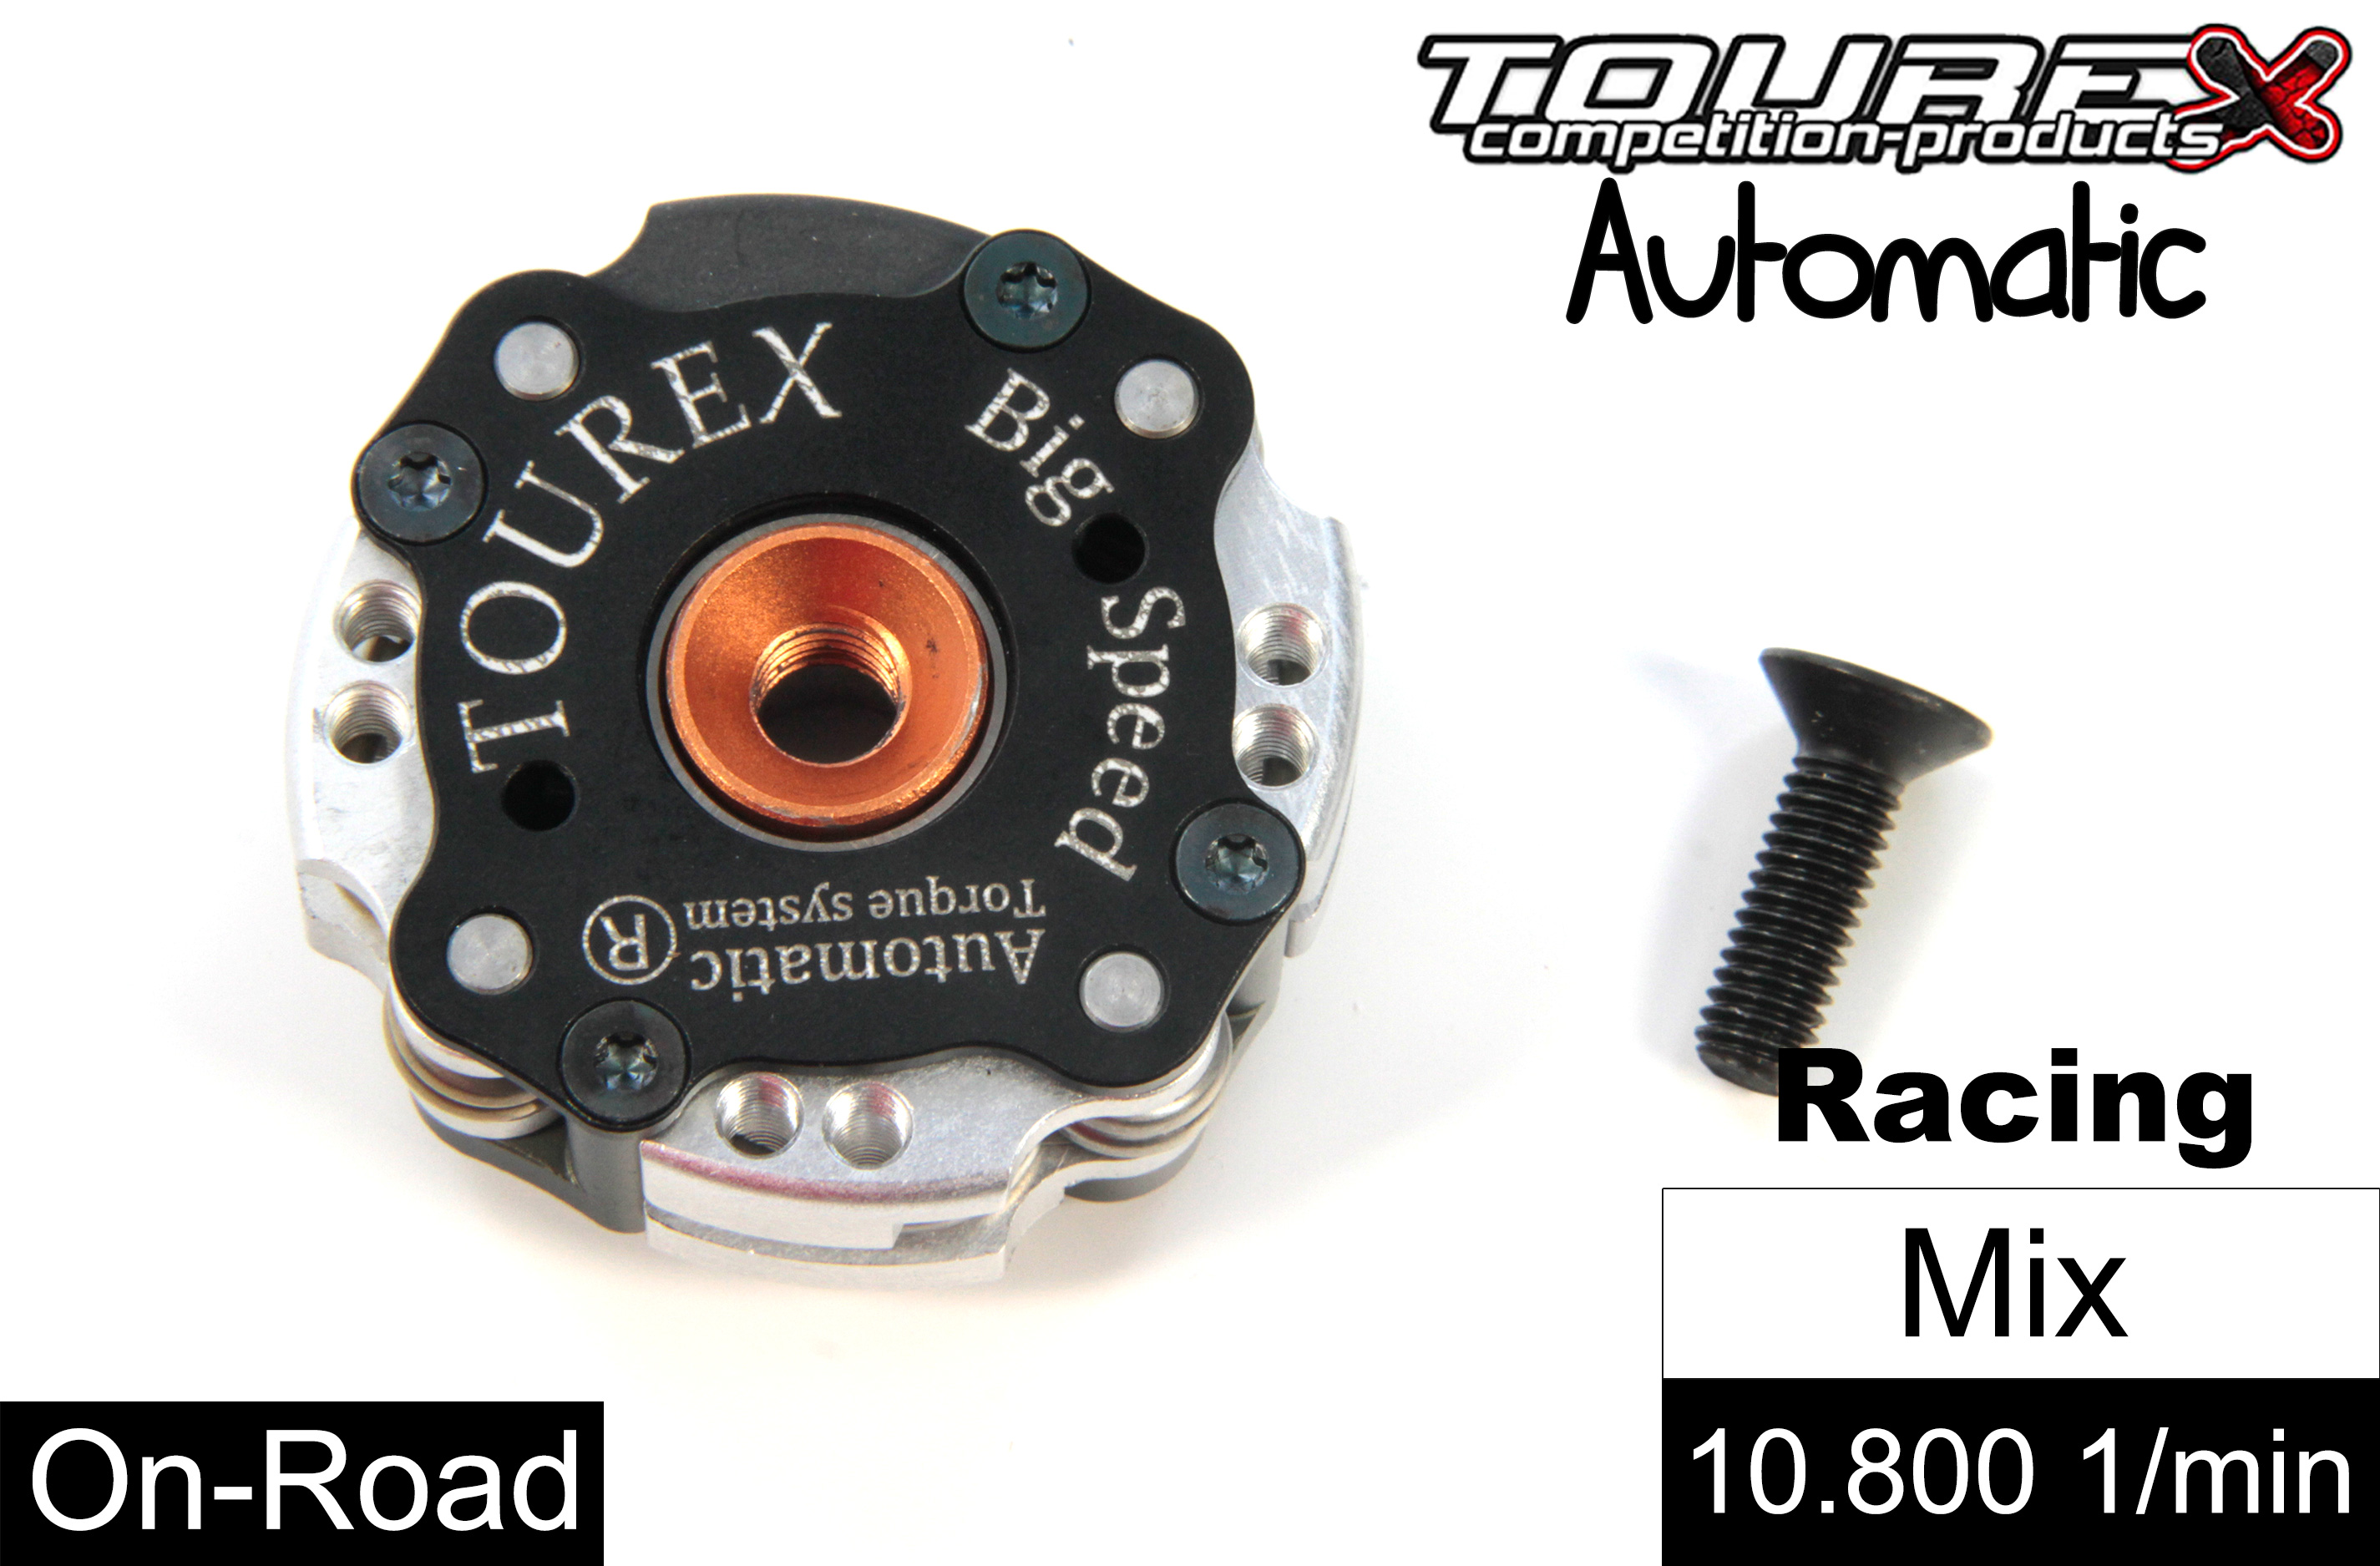 TXLA-910-MIX Tourex Big-Speed Automatic for FG/HPI/Losi/Smartech and many more